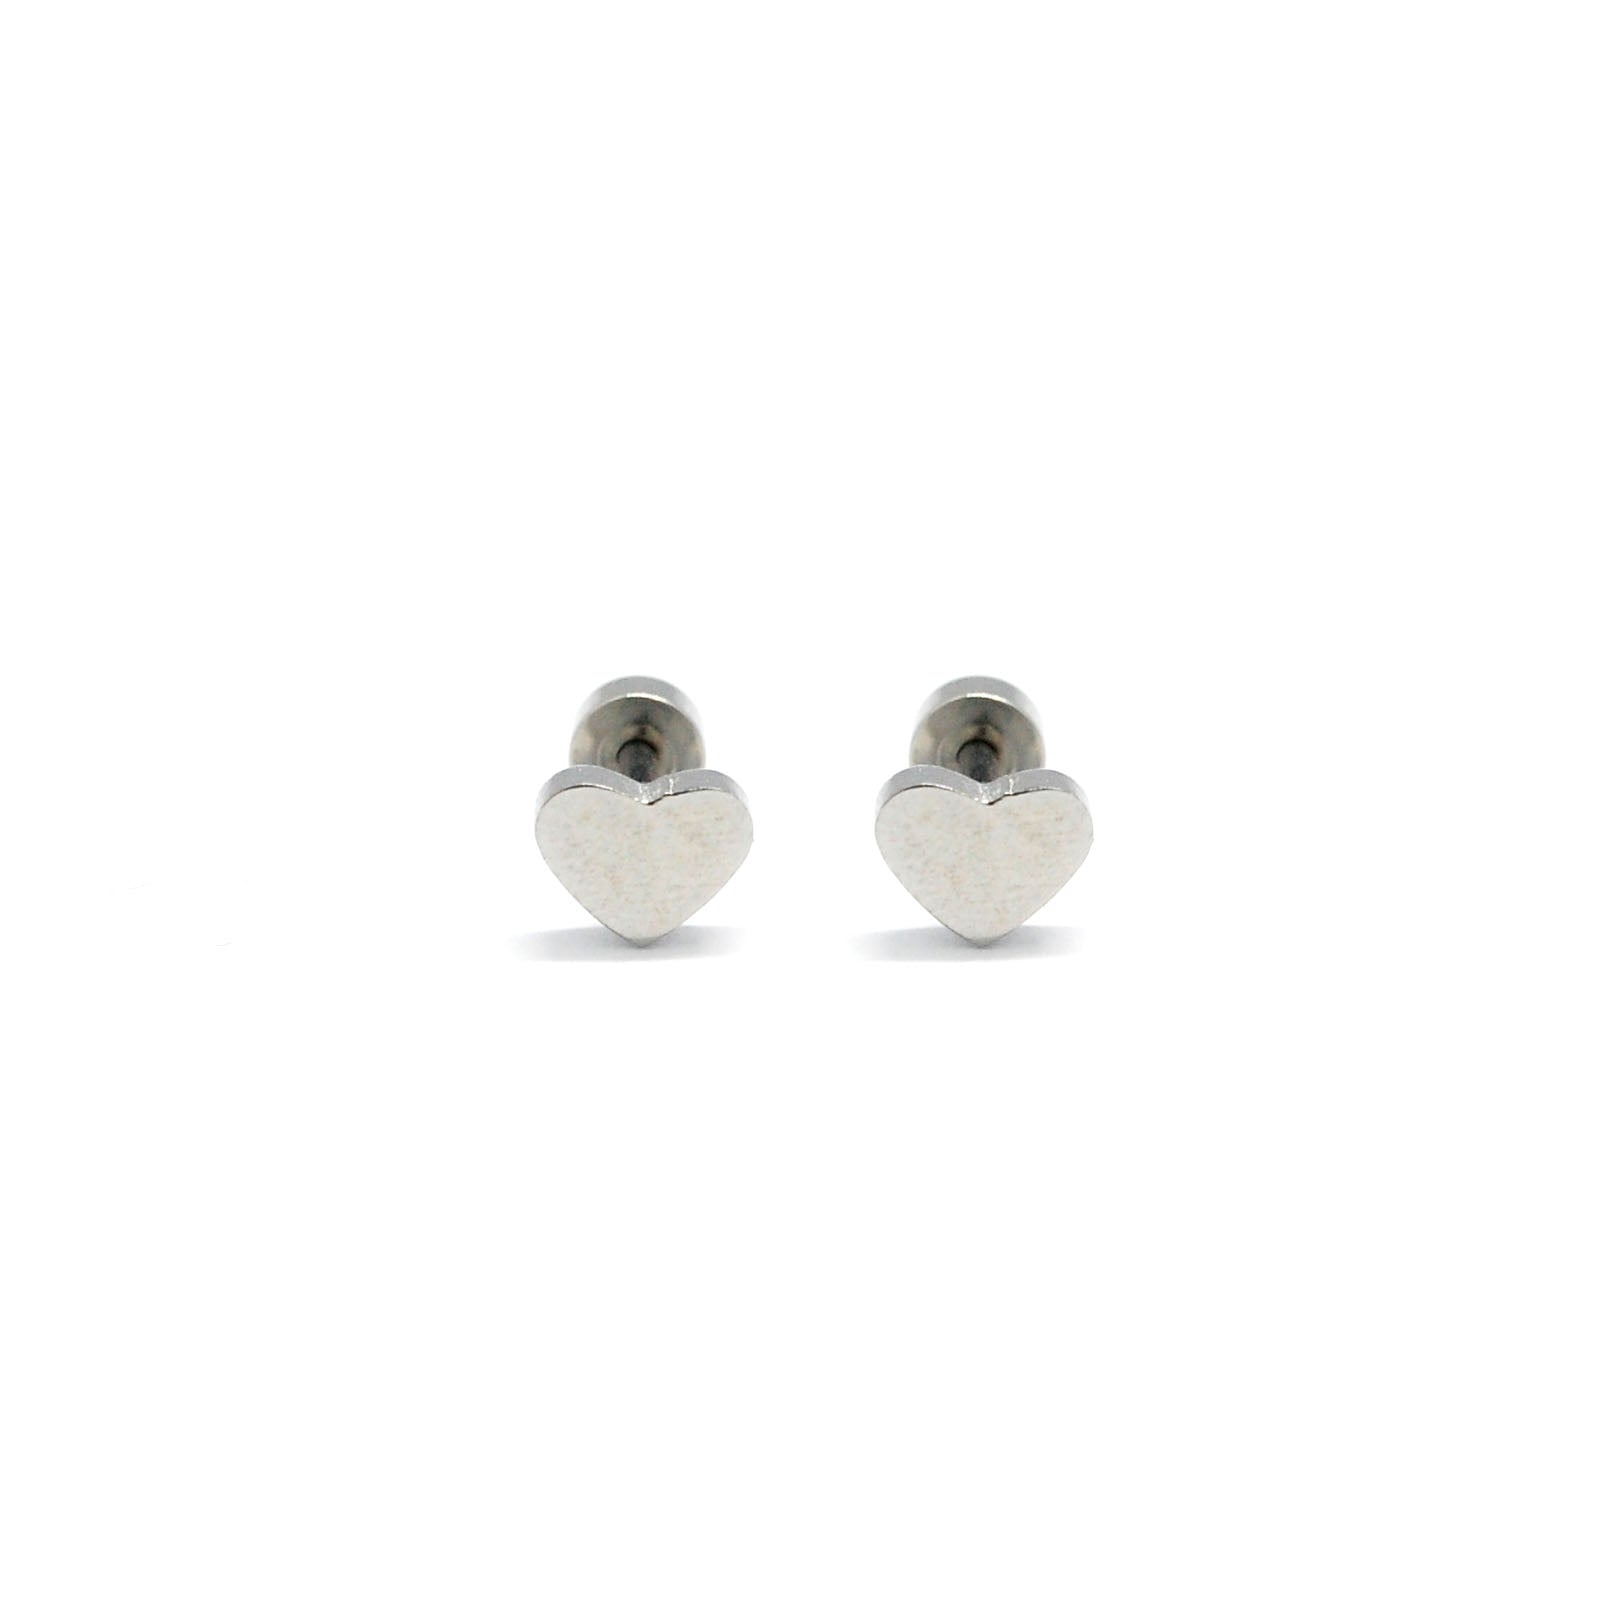 ESE 7672: Solid Heart Studs w/ Baby Safe Chapita